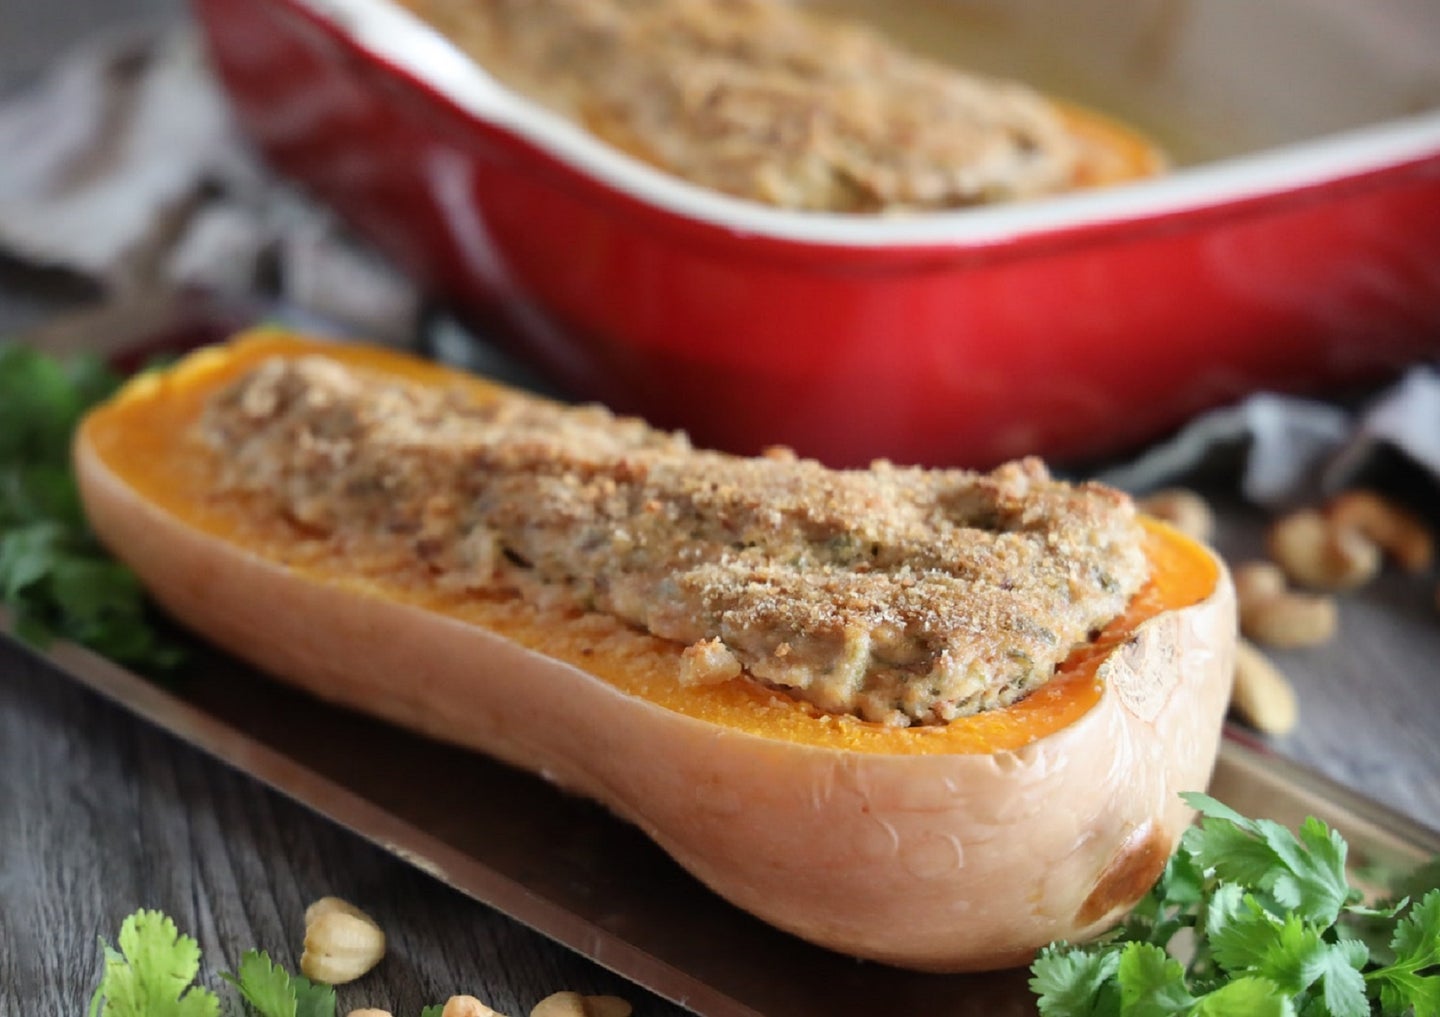 Roasted and stuffed butternut squash as an alternative to turkey at Thanksgiving dinner